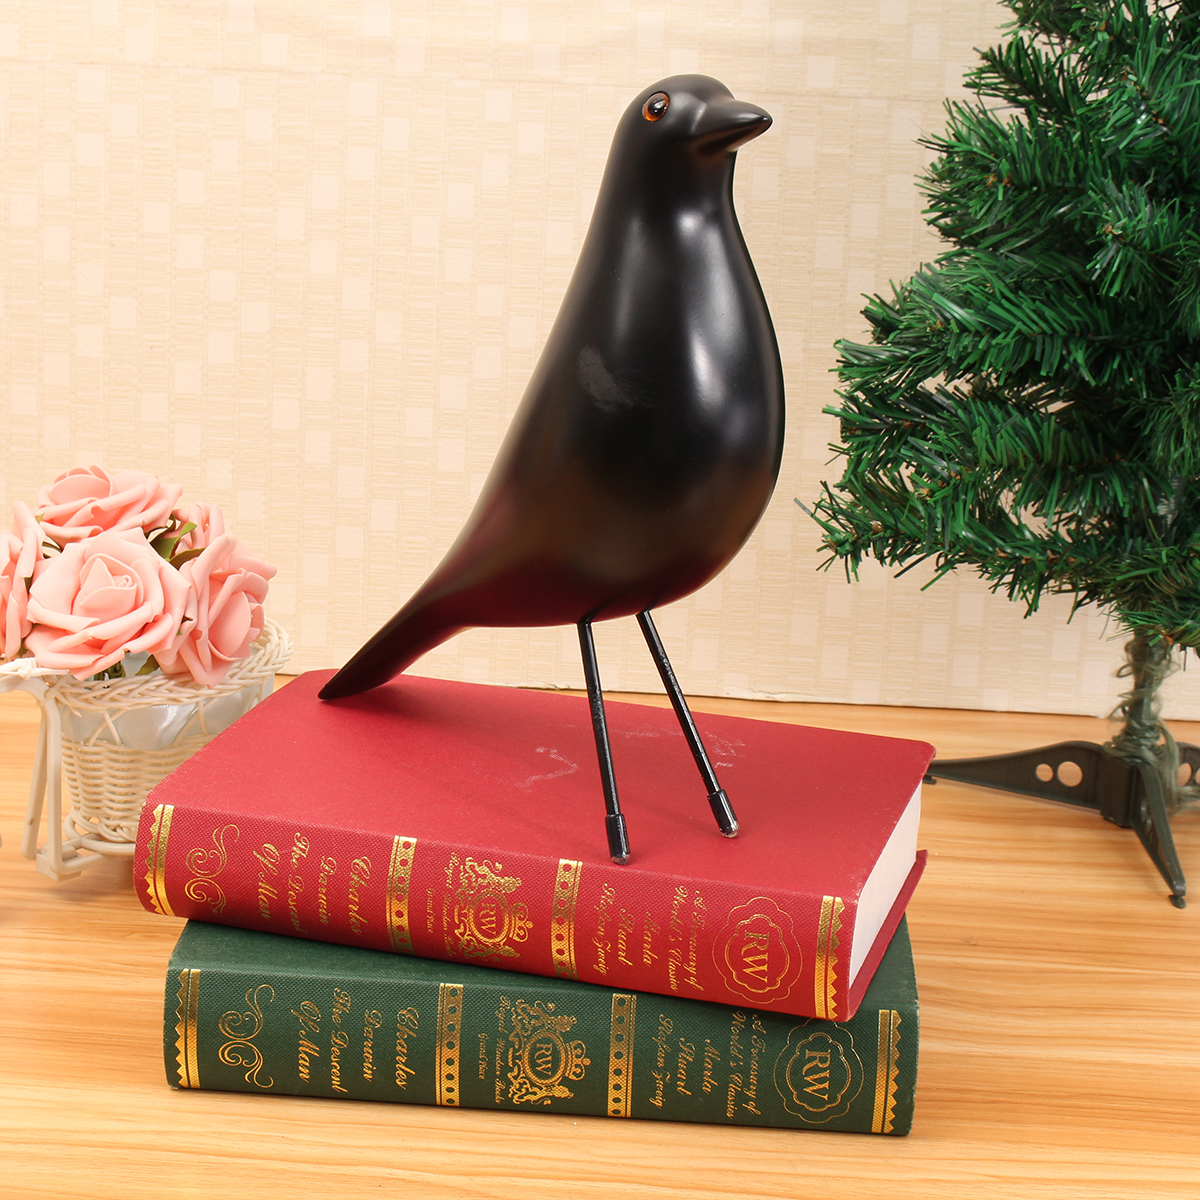 11-Bird-Desk-Ornament-House-Resin-Pigeon-Gift-Office-Home-Window-Table-Decorations-1641349-4